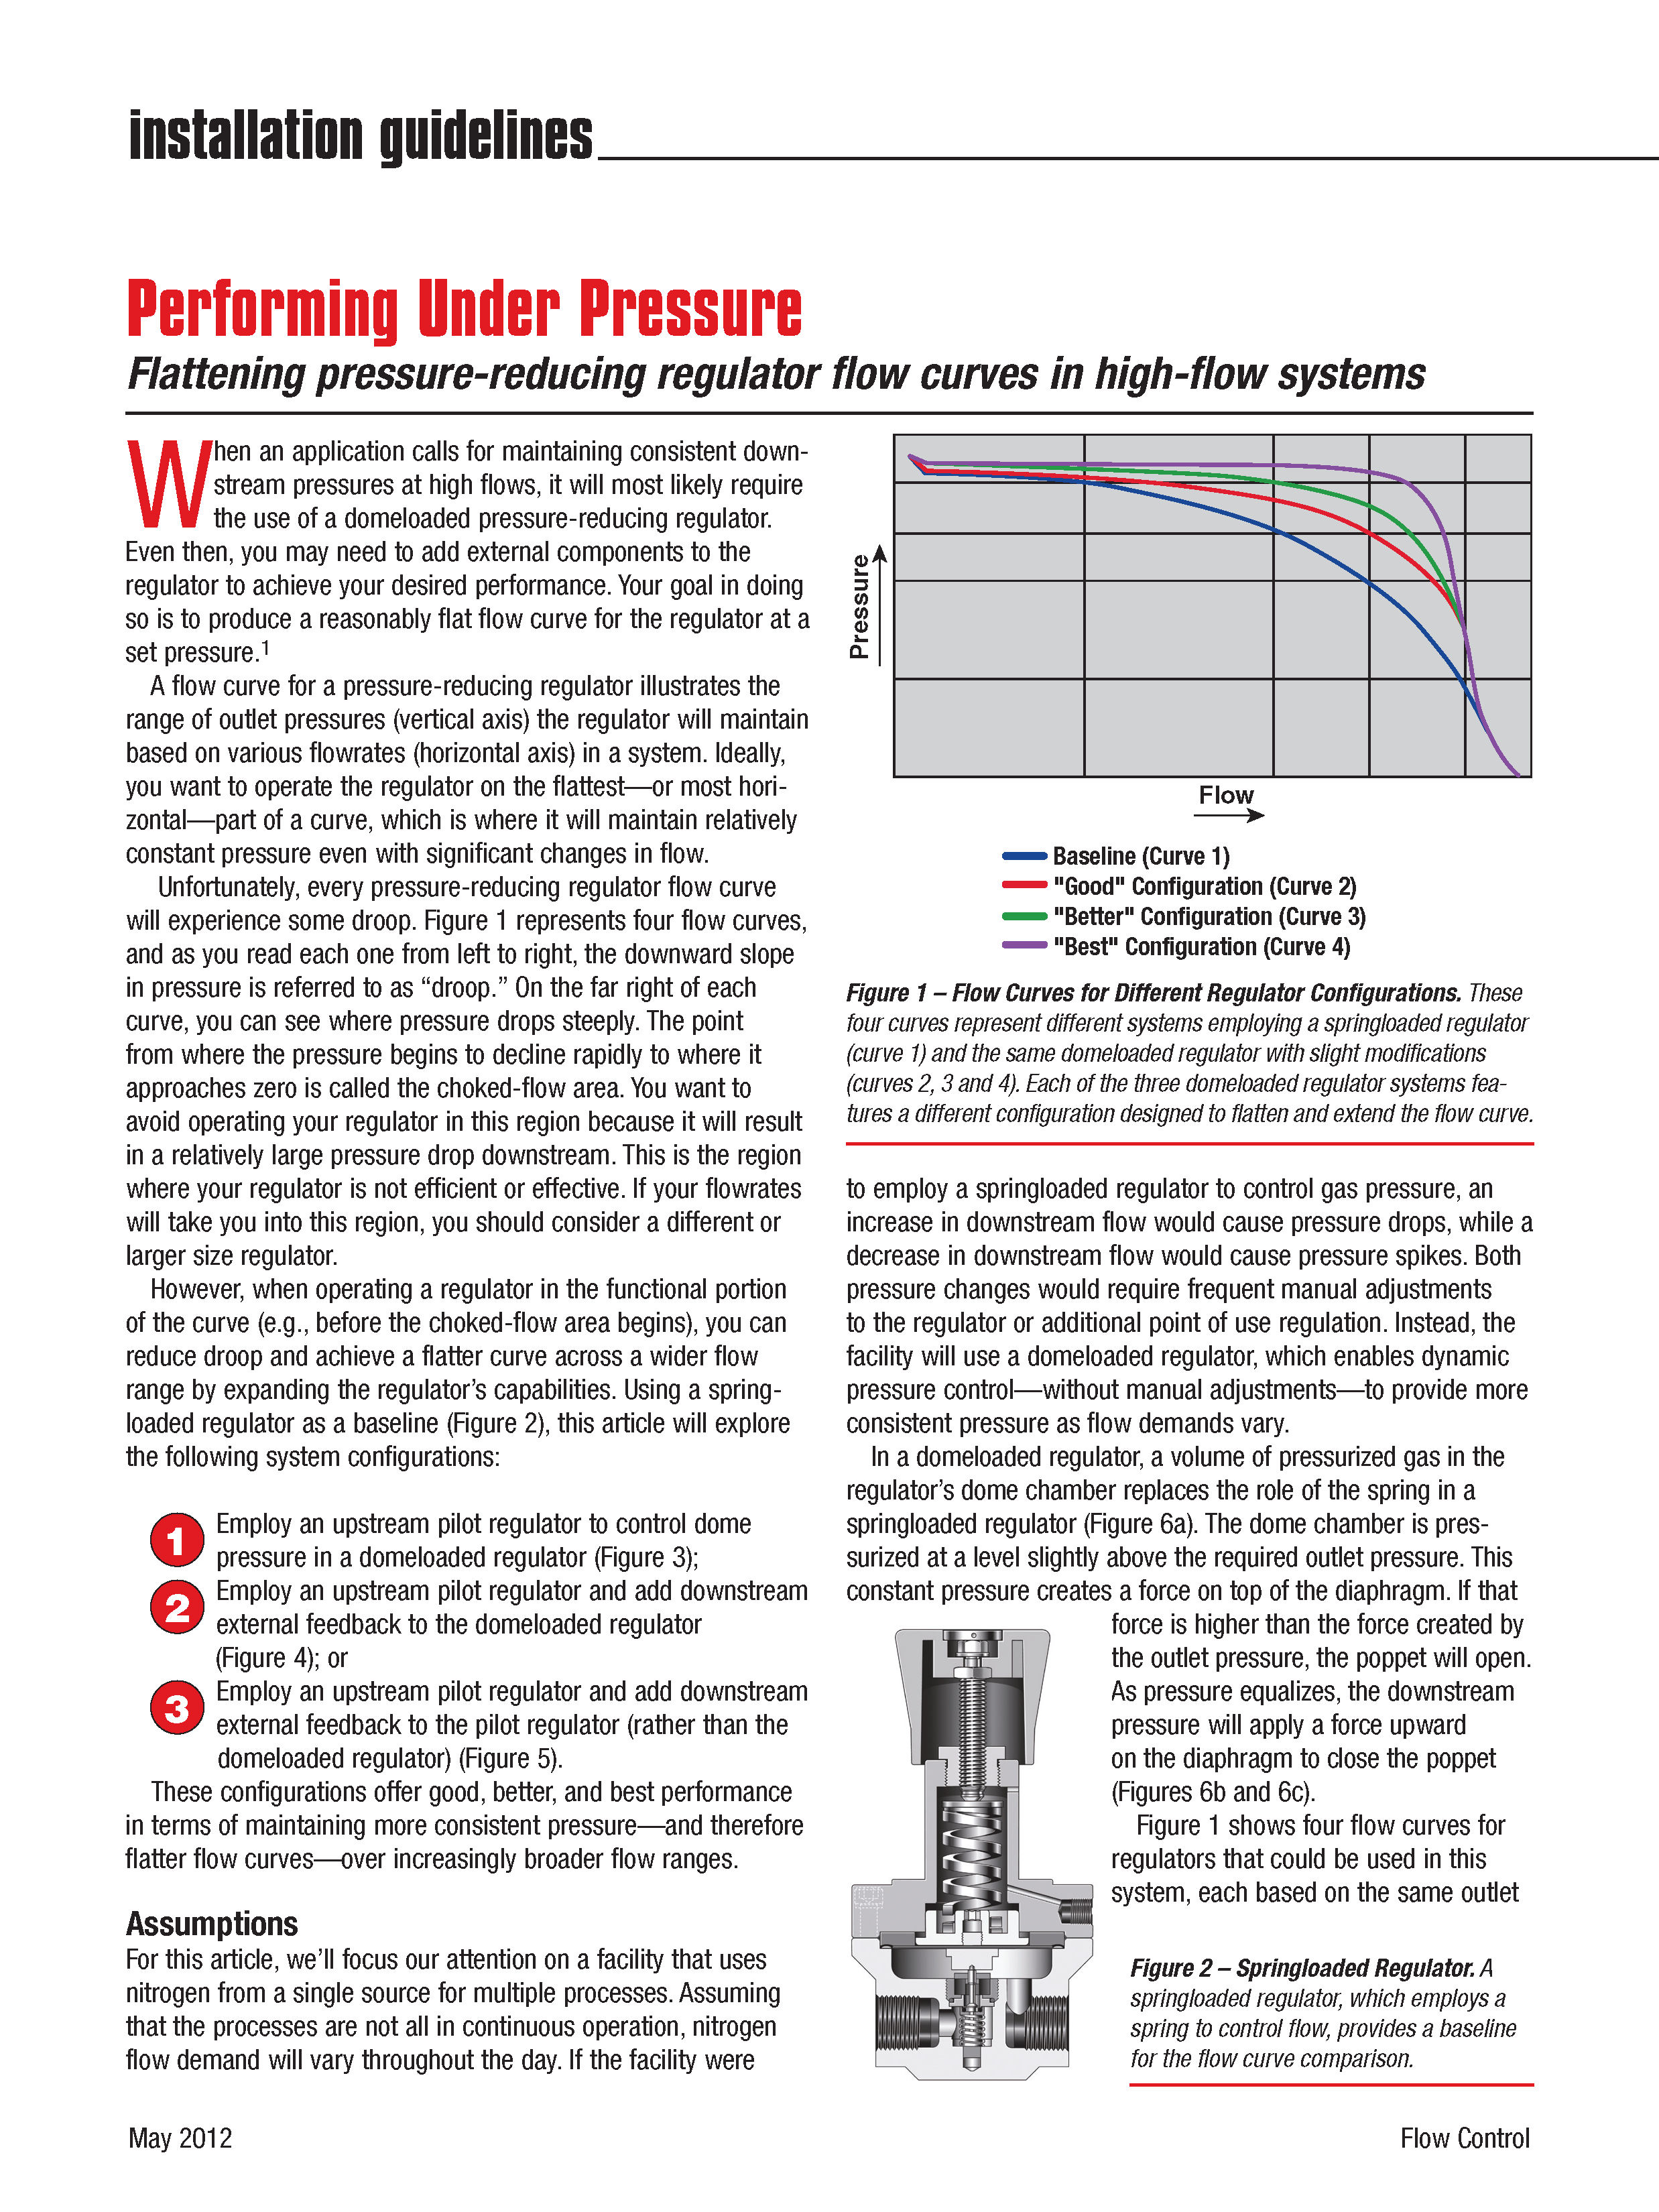 performing_under_pressure_flow_curves_article_reprint_cover_web